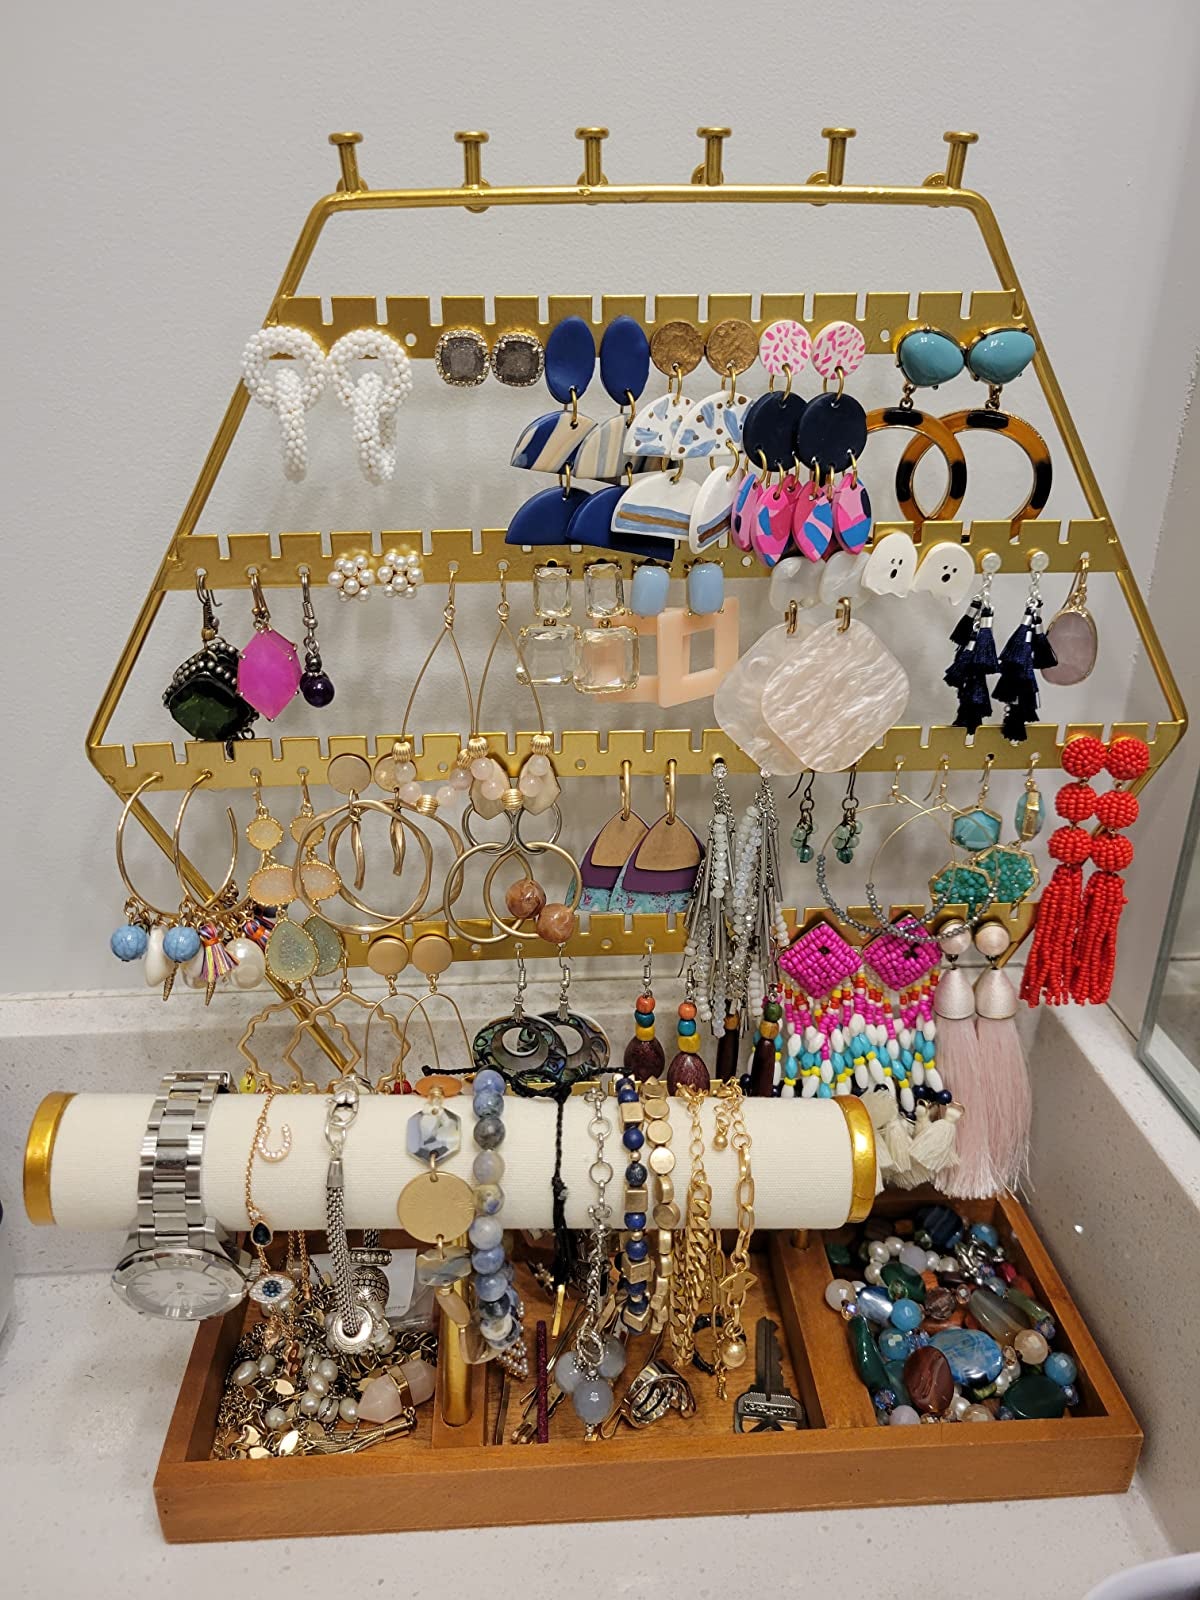 Reviewer image of gold and wood hexagon shaped jewelry organizer with earring, bracelets, and necklaces hanging on it